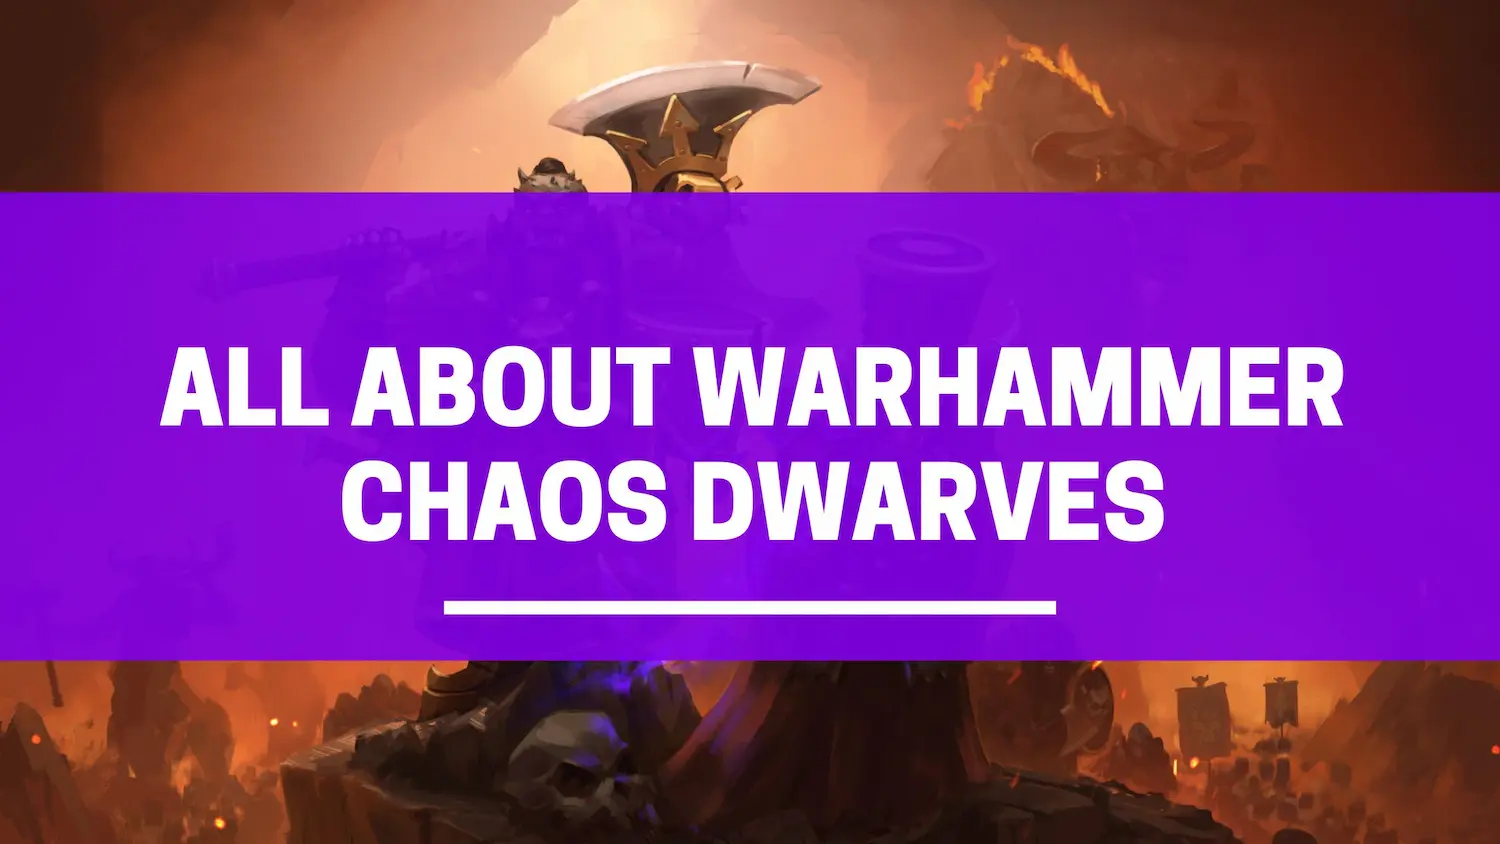 all about Warhammer chaos dwarves